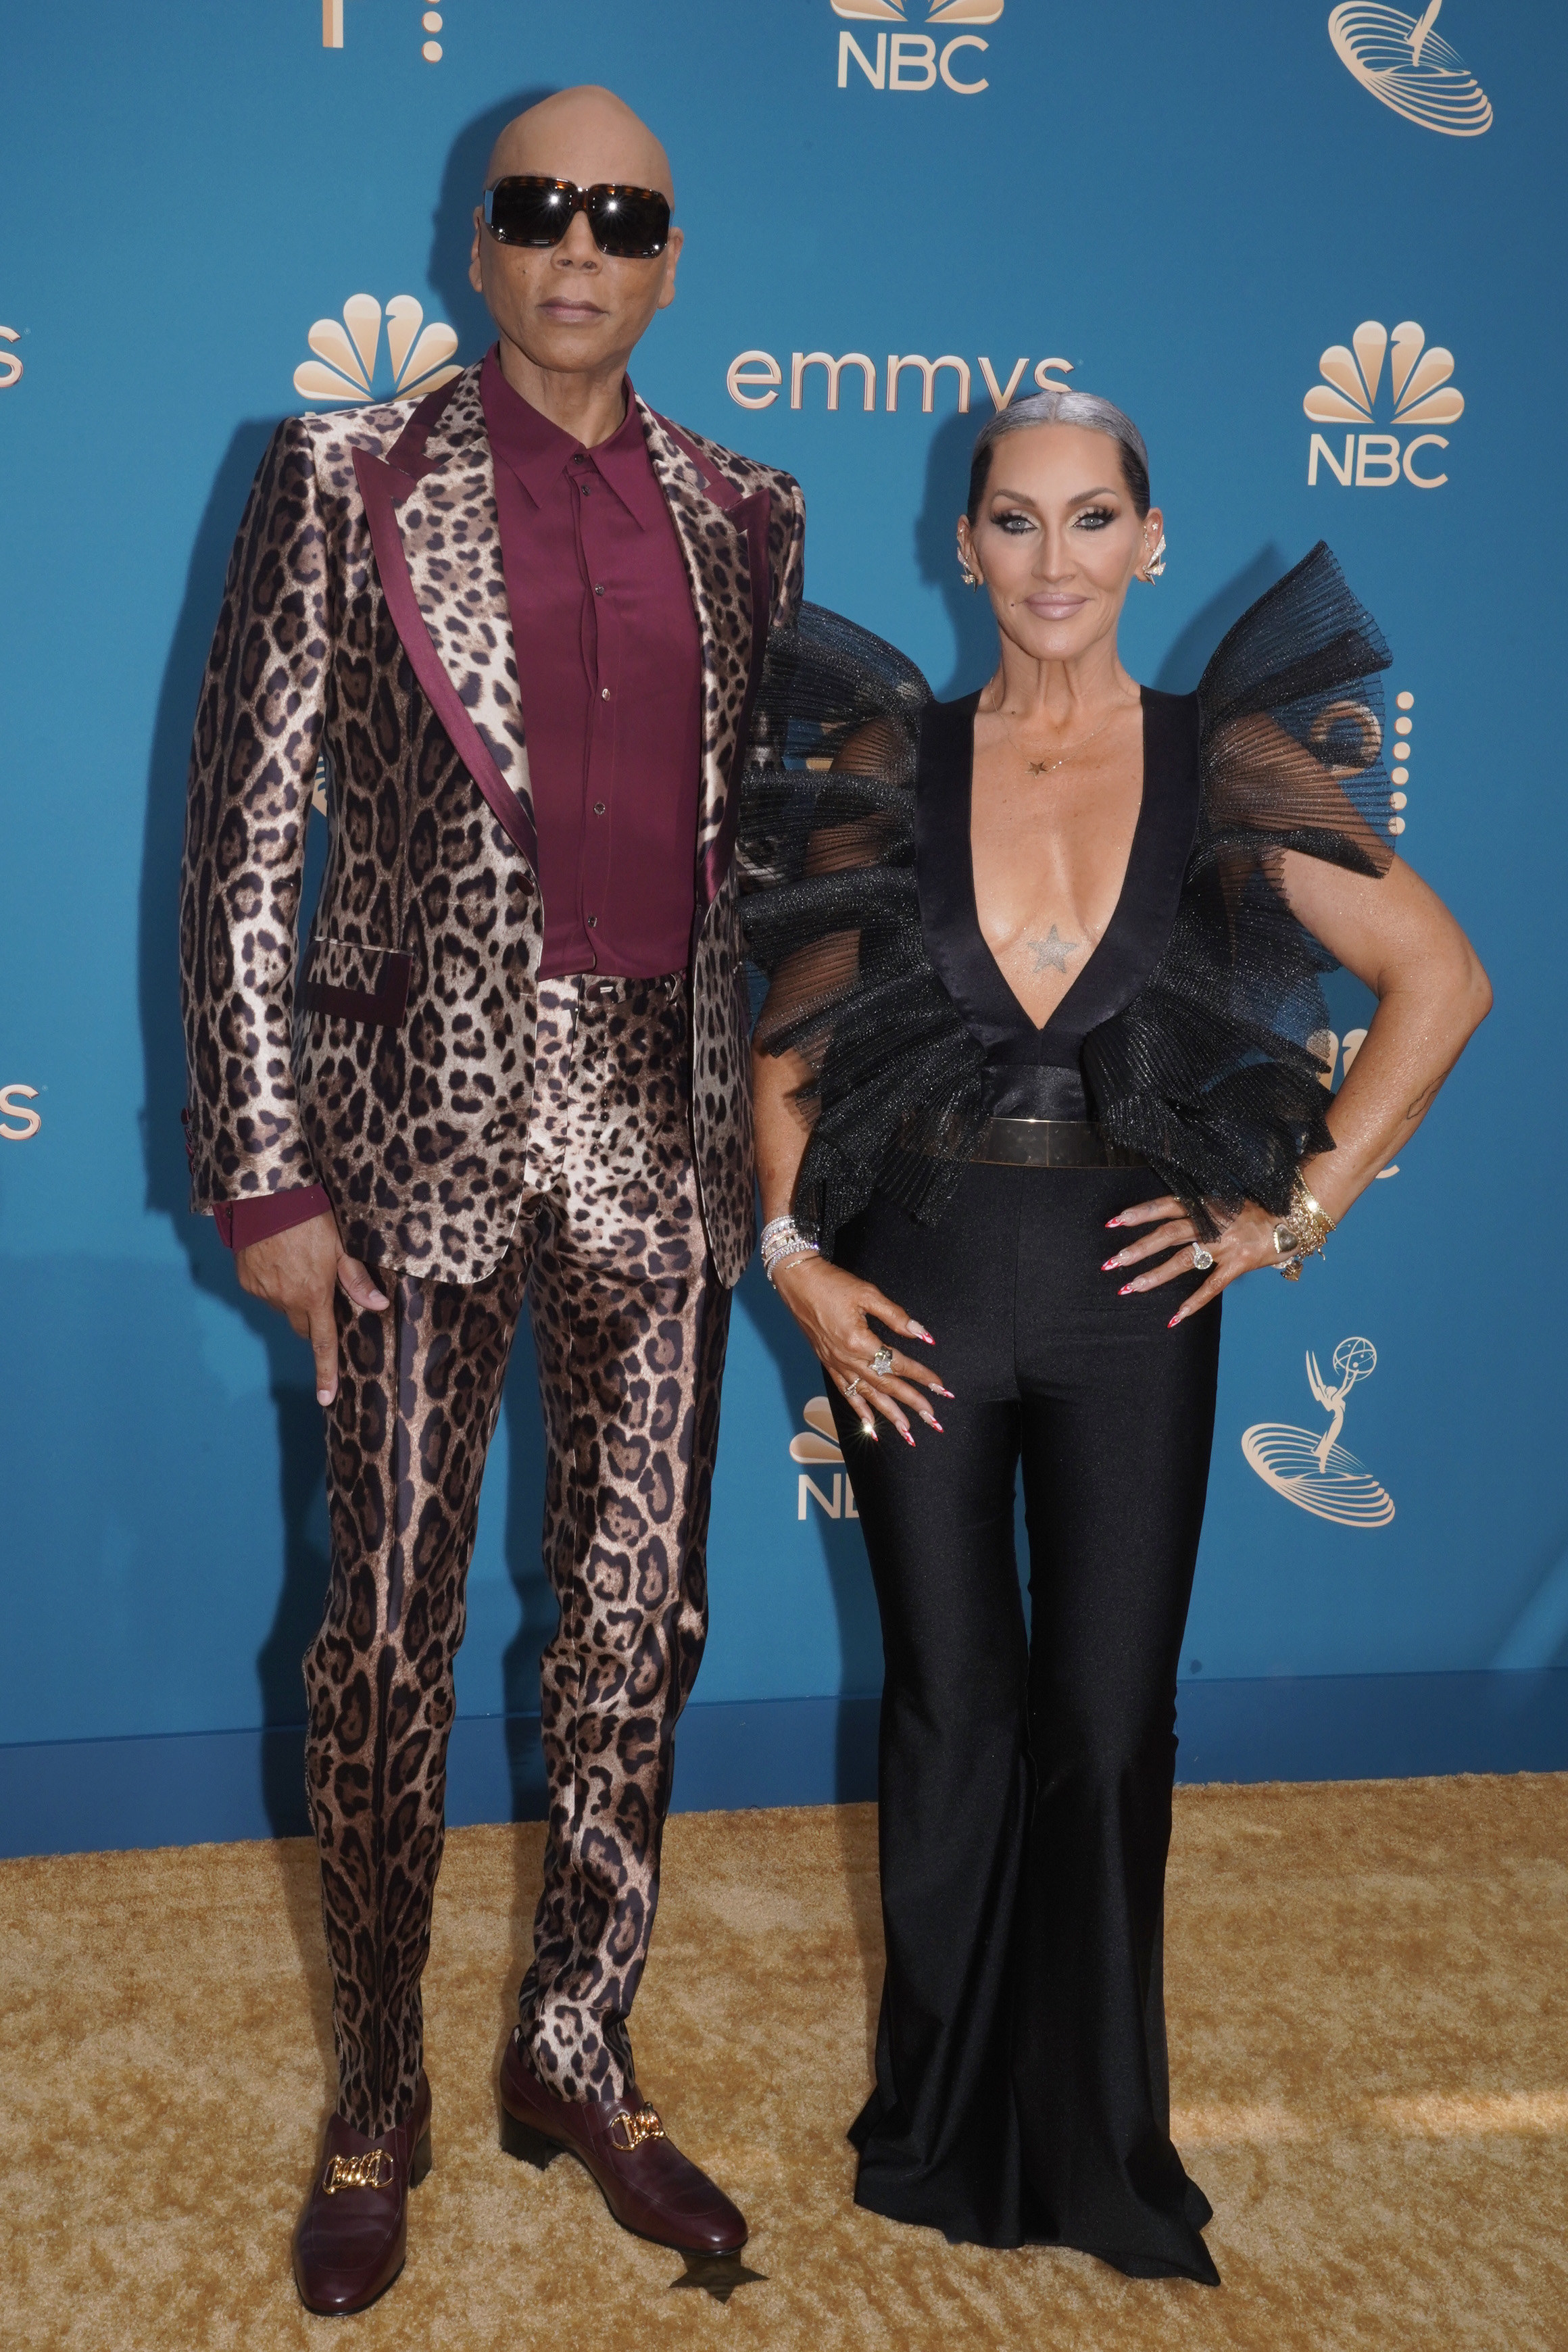 RuPaul wearing a cheetah print suit and Michelle Visage in a black jumpsuit